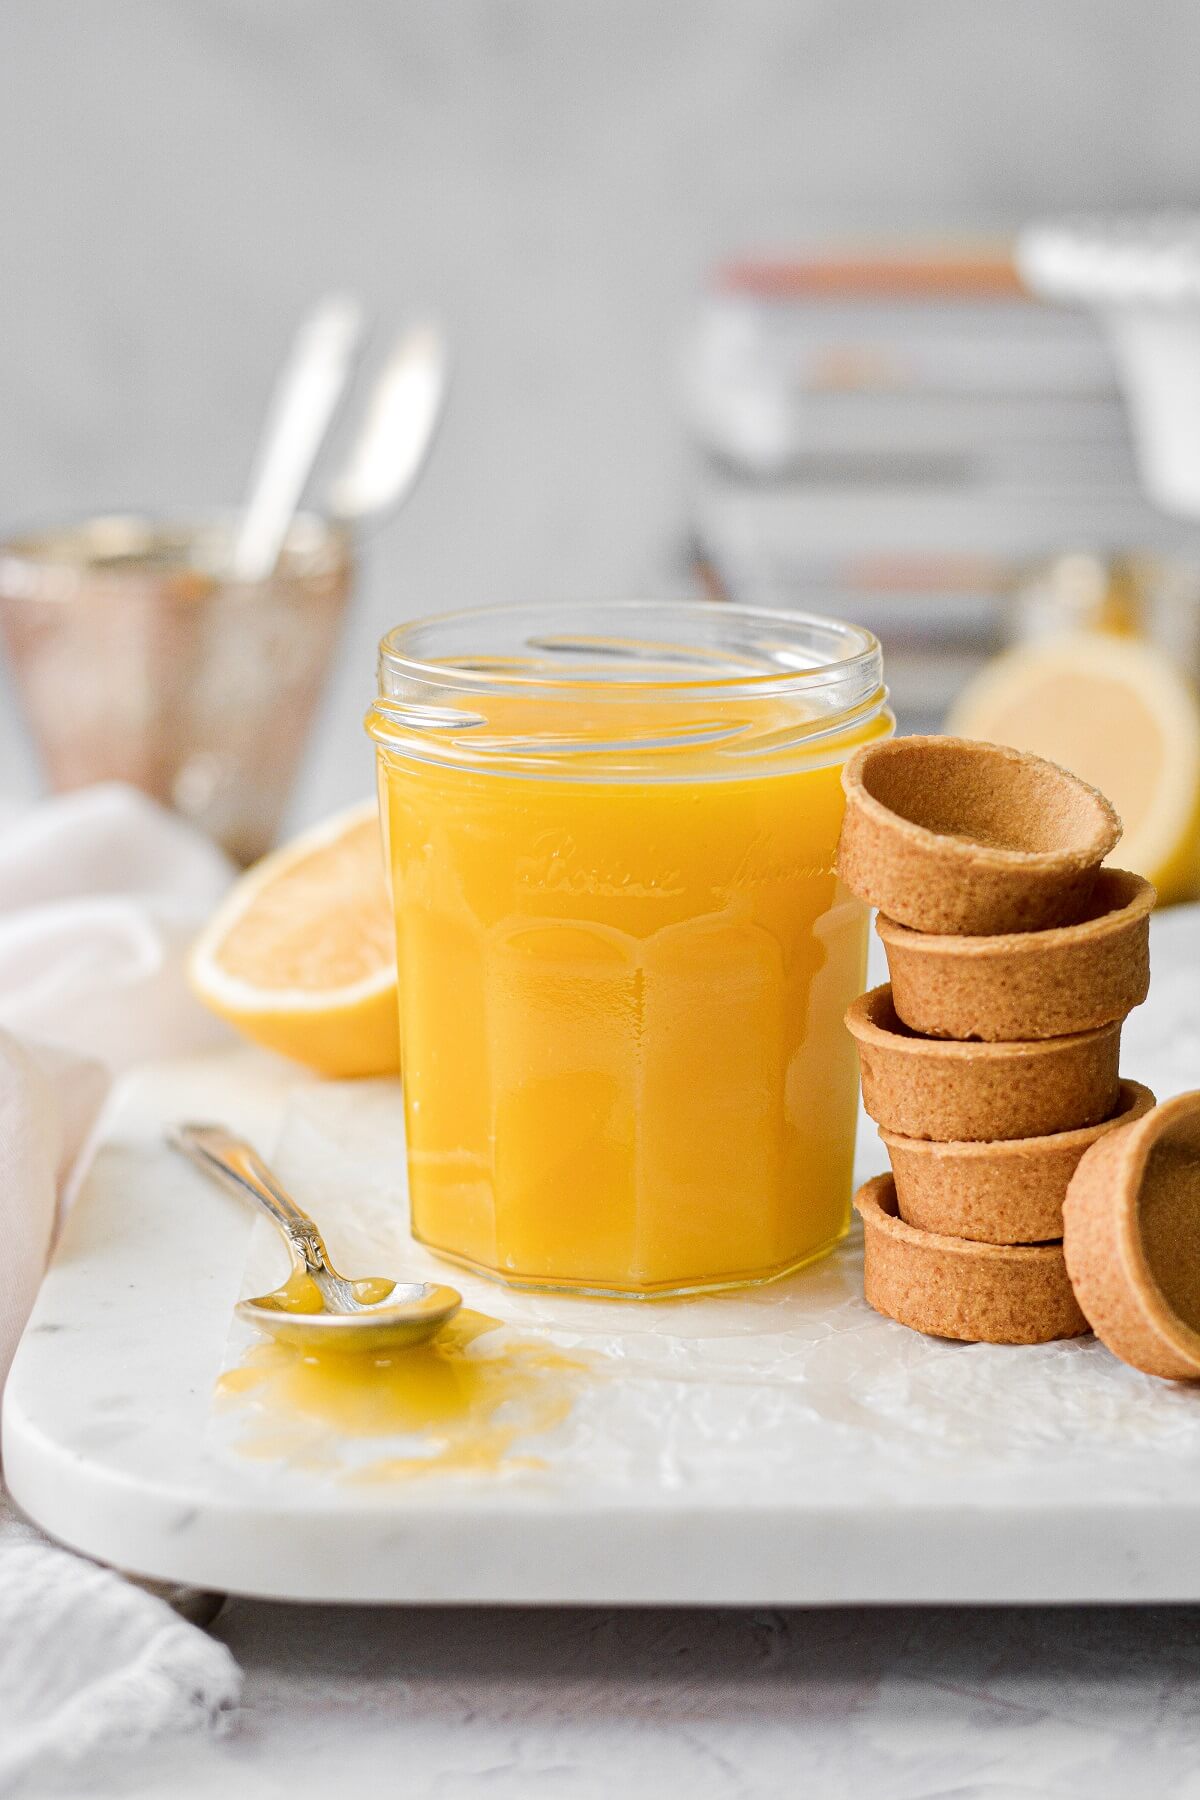 A jar of lemon curd, next to a stack of mini pastry shells.